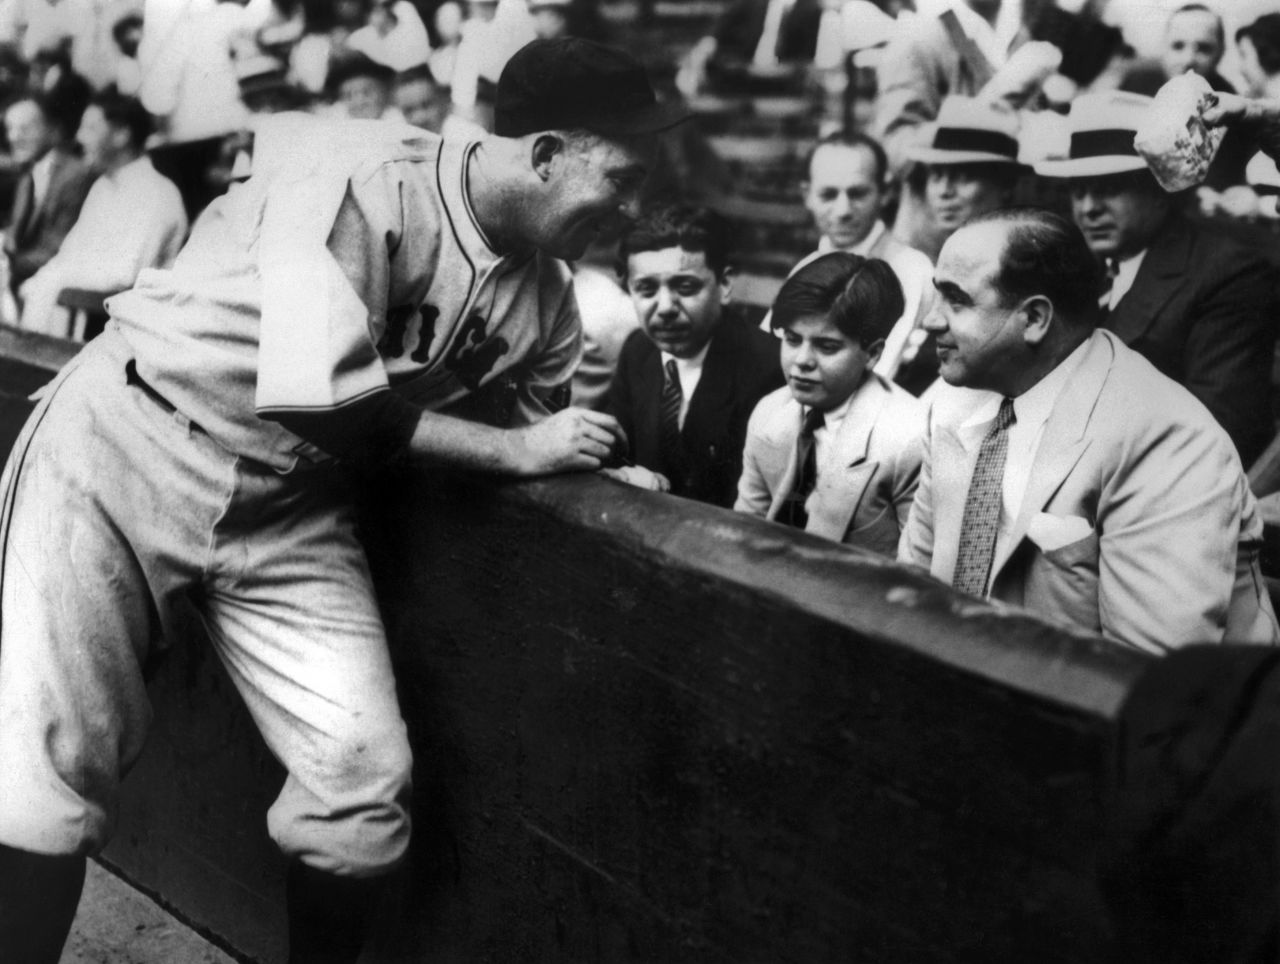 As well as being a huge golf fan, Capone loved his baseball. Sitting alongside his son, Albert (Sonny) Capone, he chats to Chicago Cubs player Gaby Hartnett.